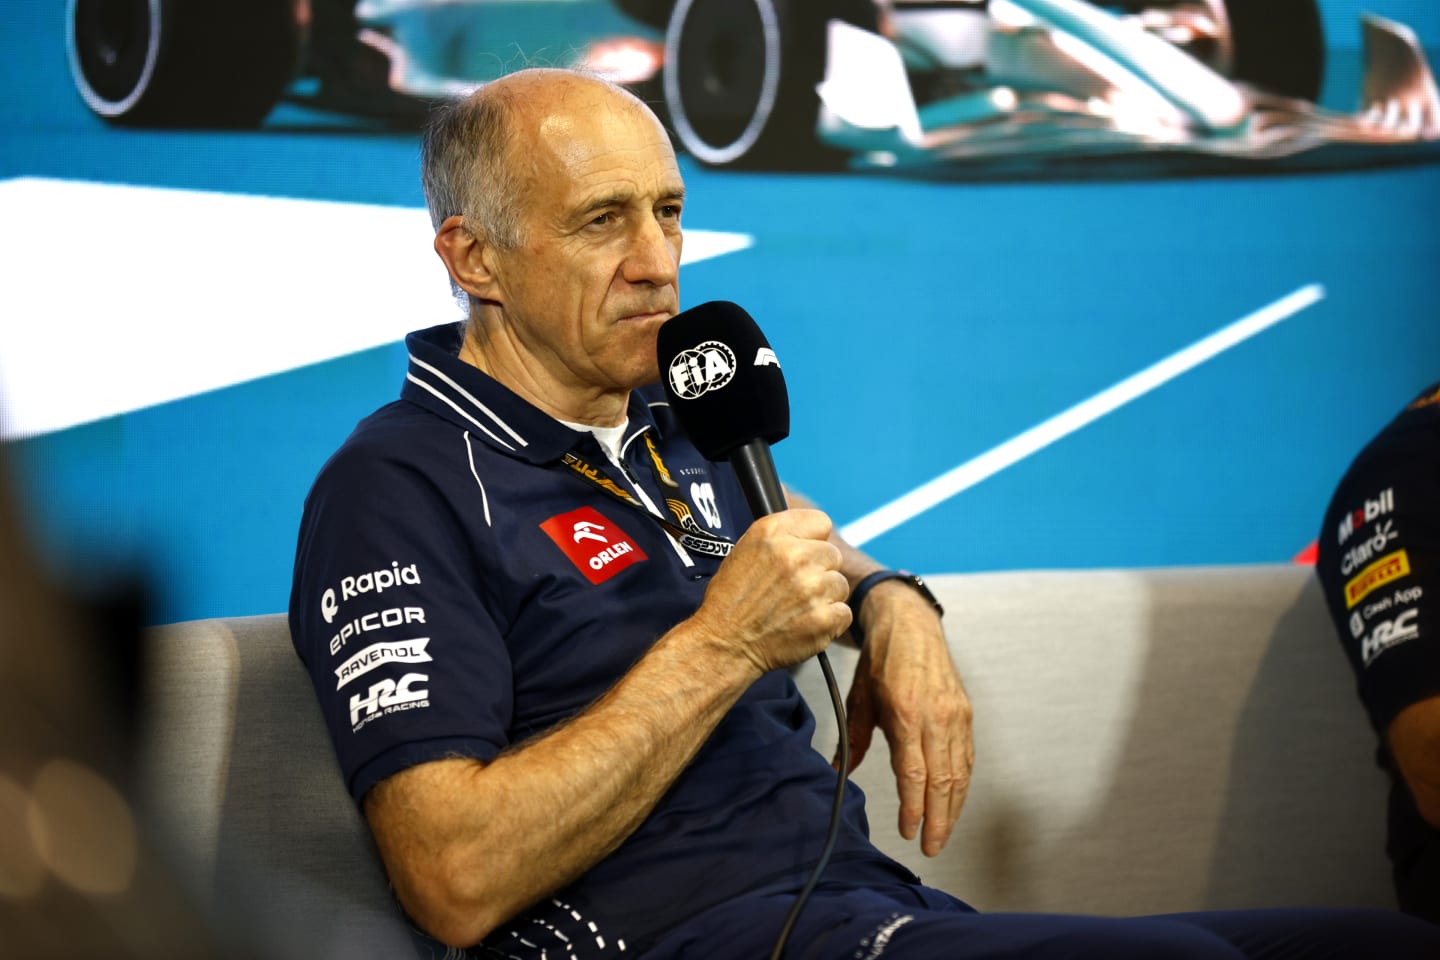 MIAMI, FLORIDA - MAY 05: Scuderia AlphaTauri Team Principal Franz Tost attends the Team Principals Press Conference during practice ahead of the F1 Grand Prix of Miami at Miami International Autodrome on May 05, 2023 in Miami, Florida. (Photo by Jared C. Tilton/Getty Images)